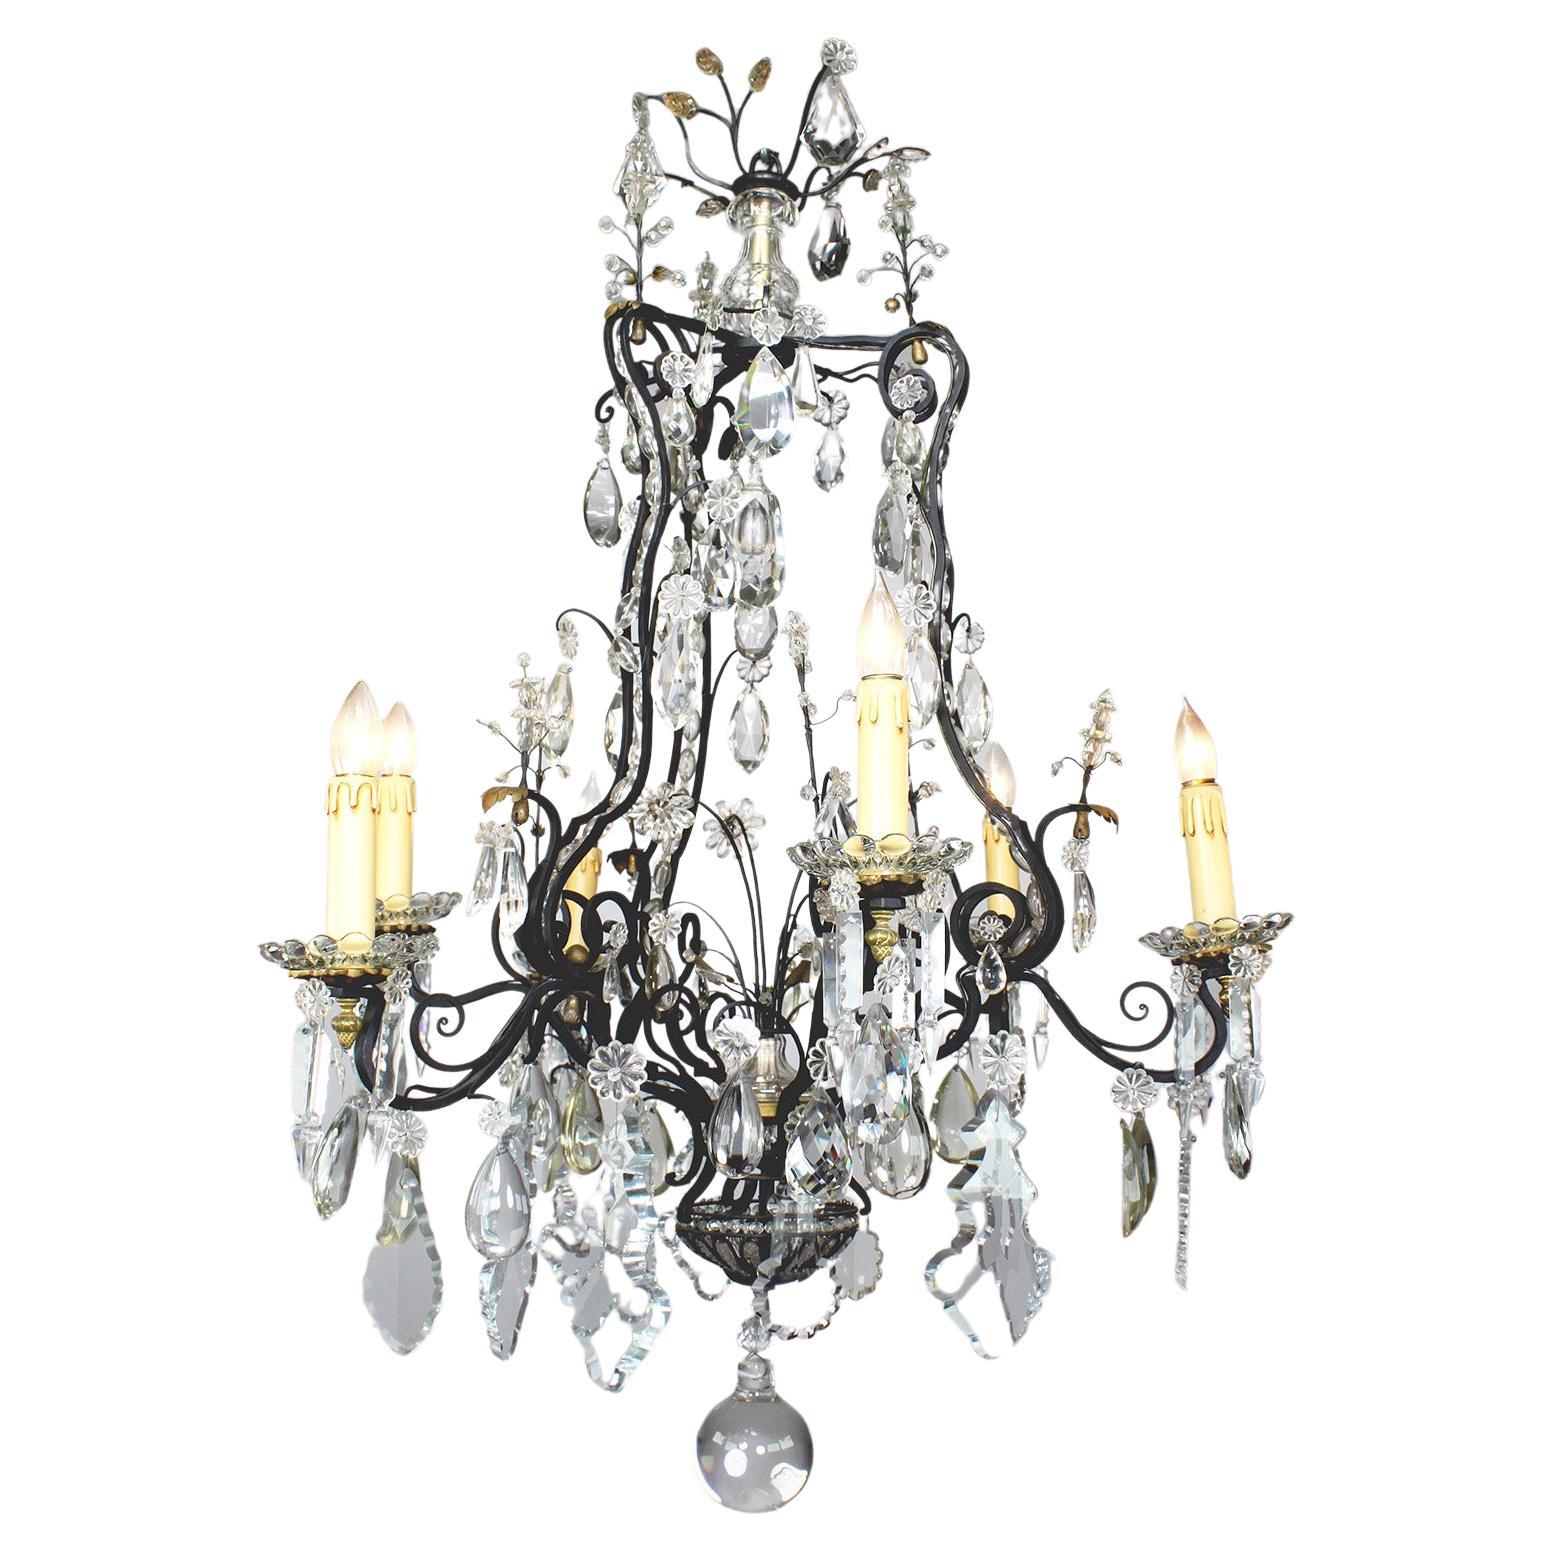 French Louis XV Style Cut-Glass, Wrought Iron and Parcel-Gilt 6 Light Chandelier For Sale